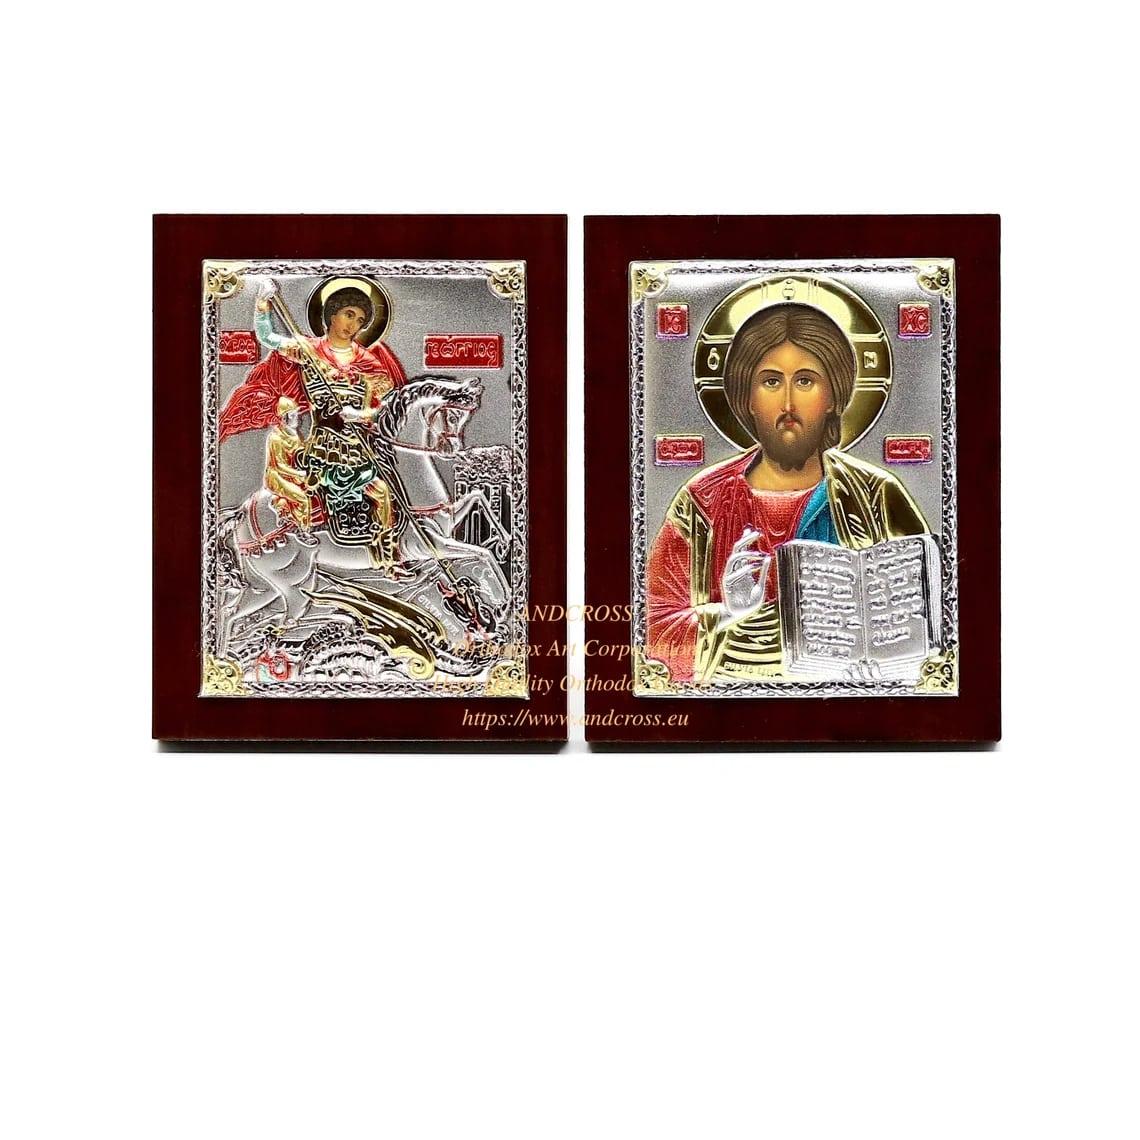 Silver Plated .999 Orthodox icons. St George Warrior